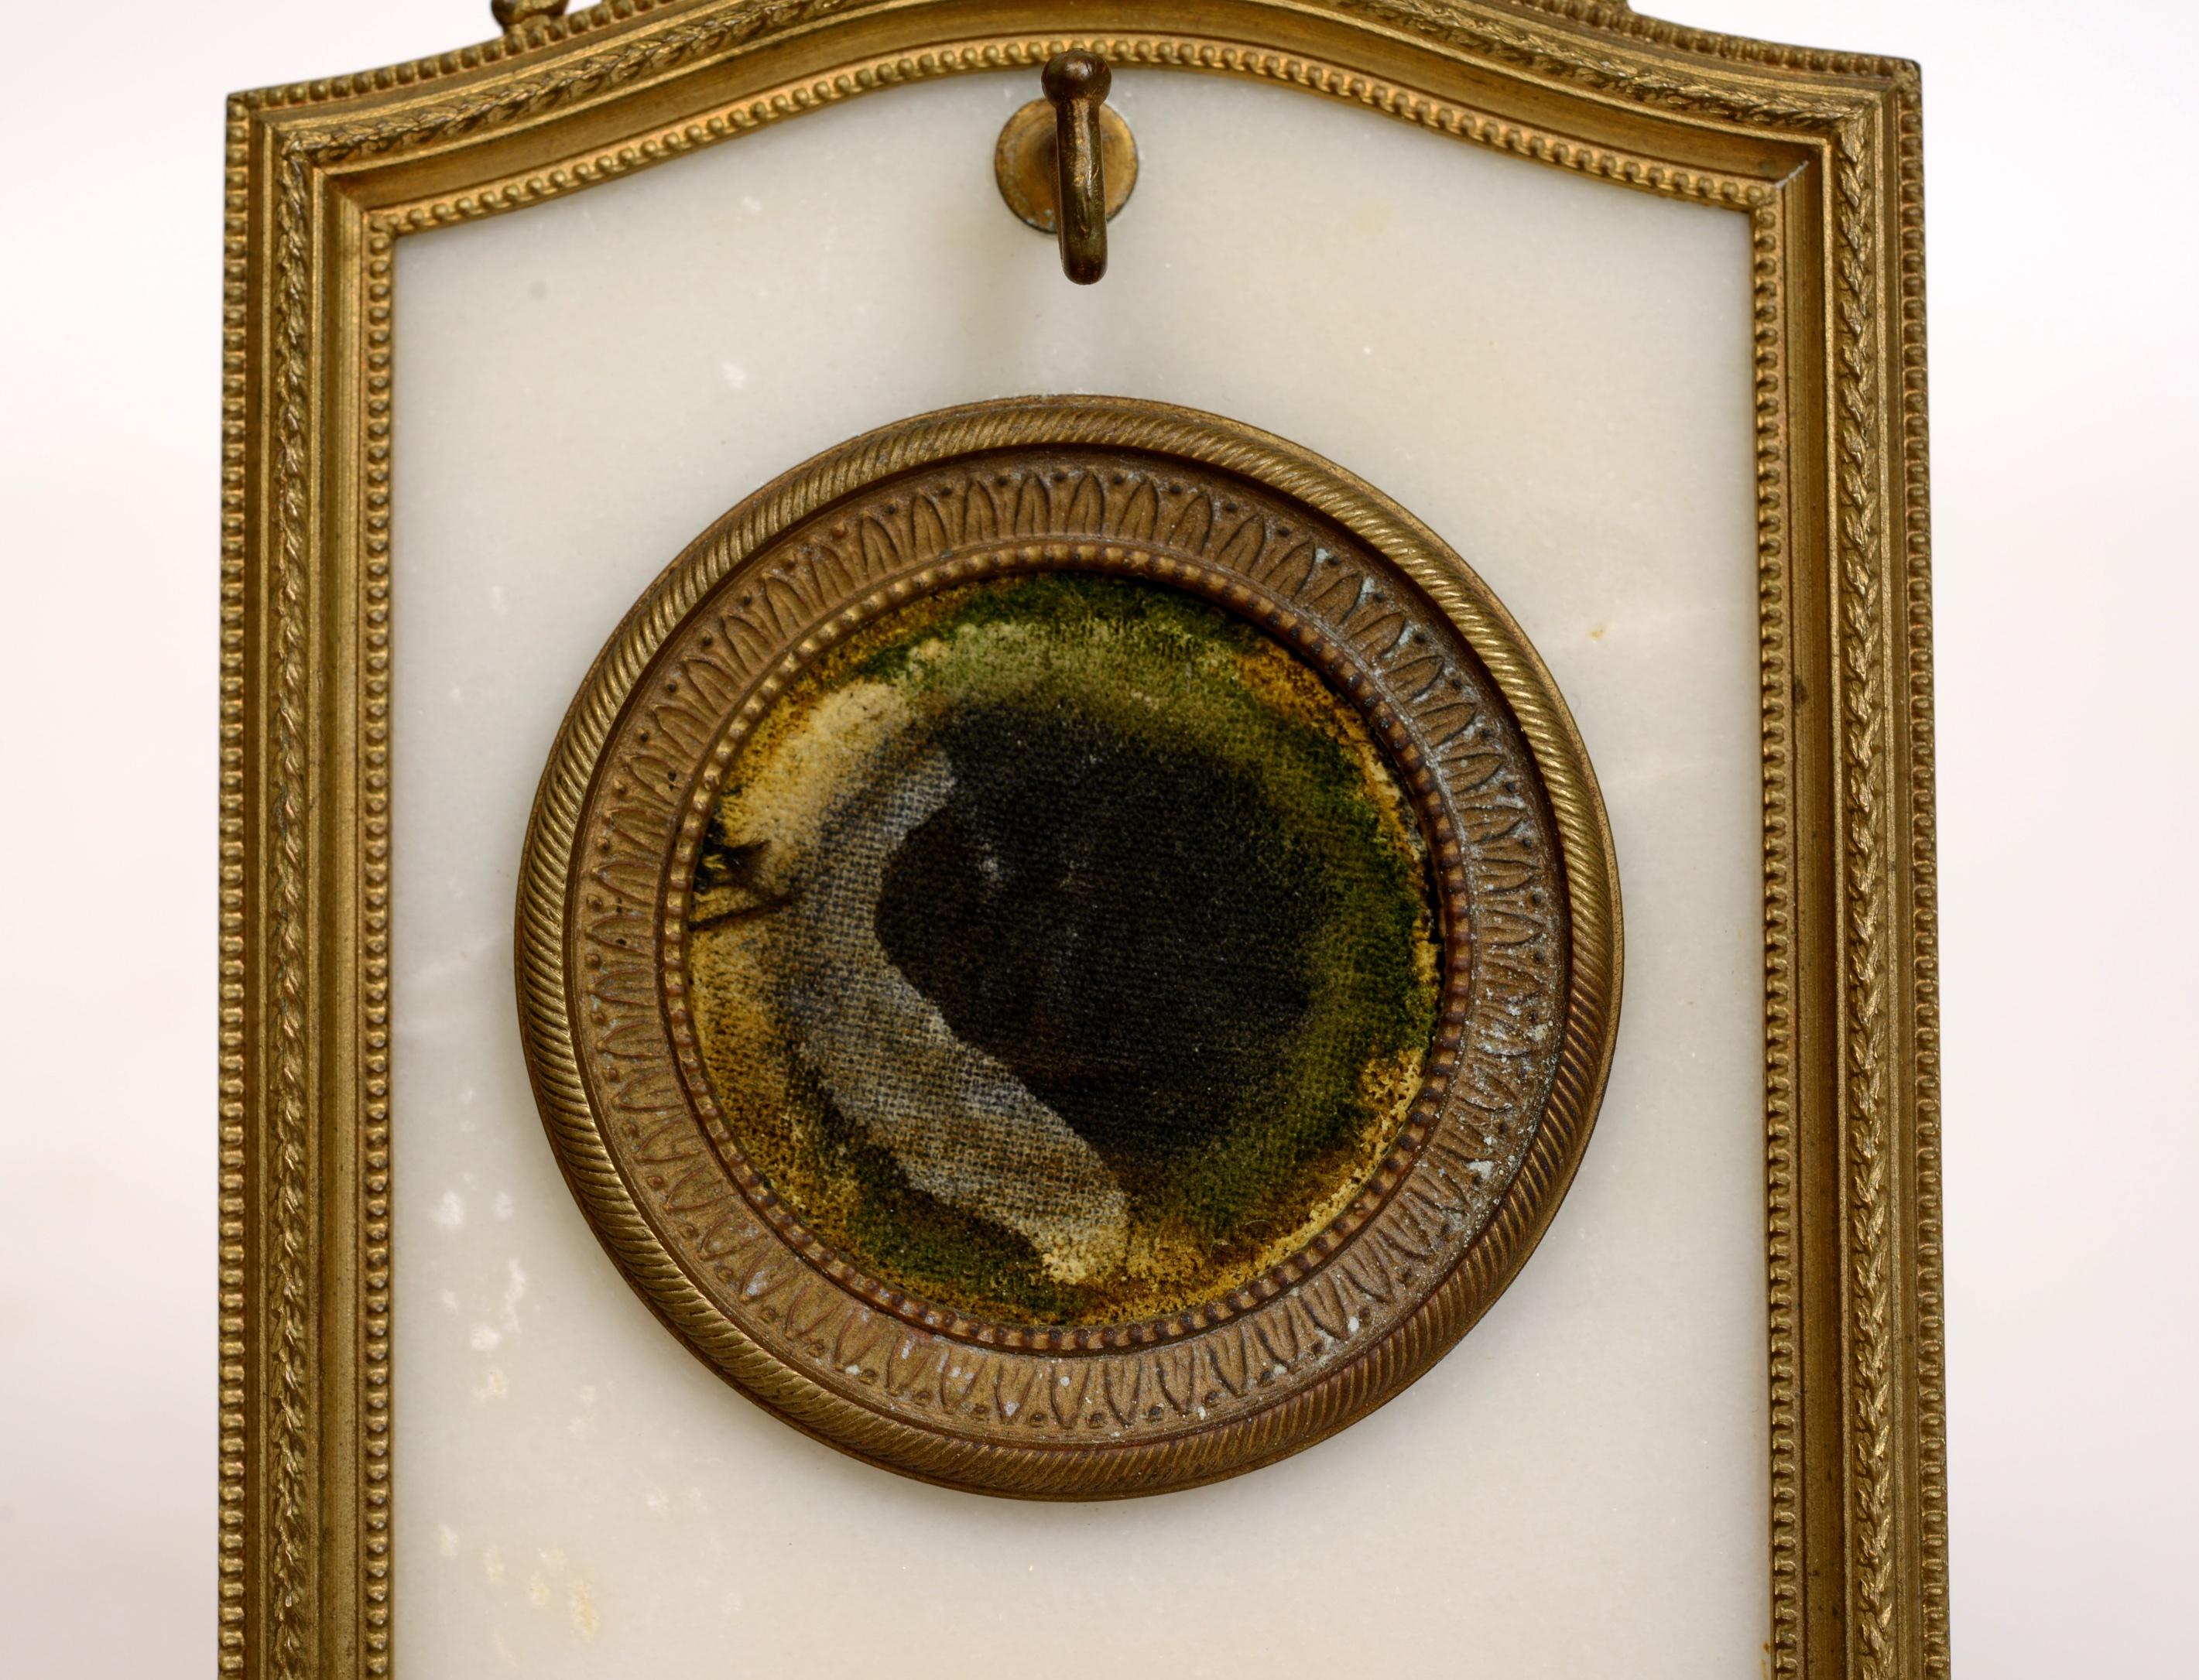 Early 19th Century French Empire Period Watch Holder, circa 1800